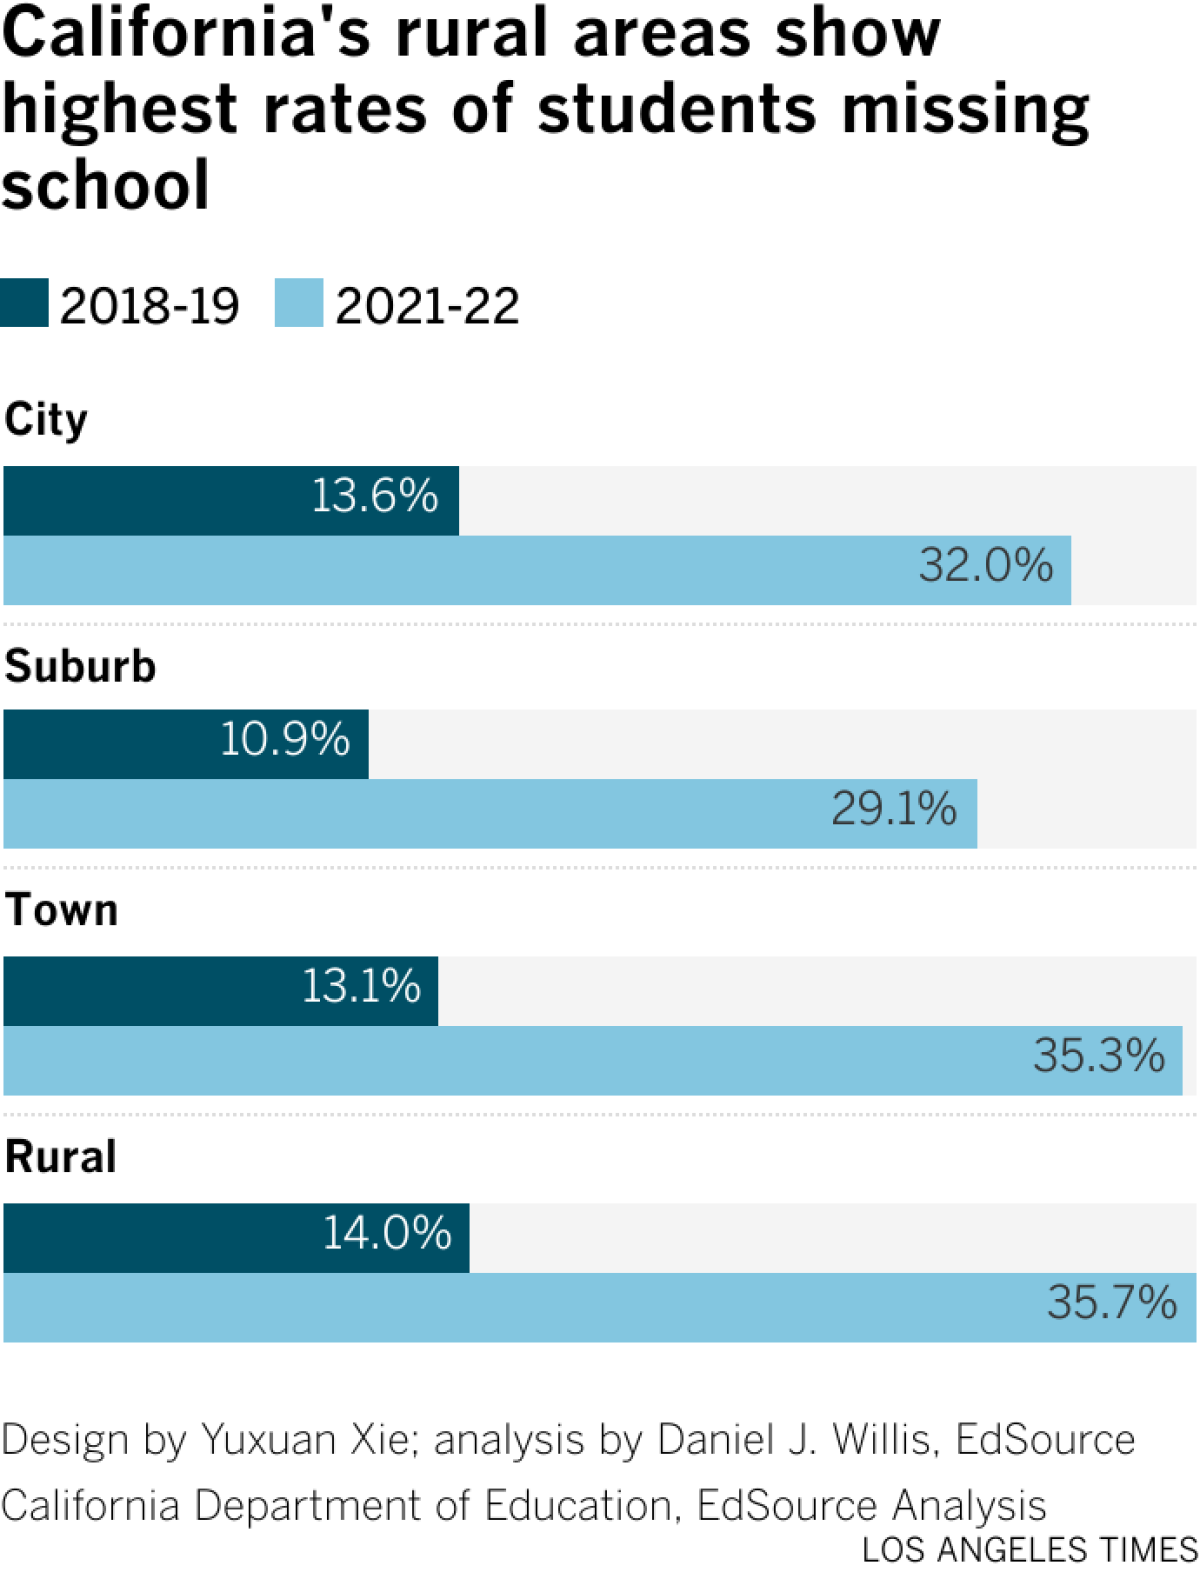 Grouped bar charts showing how 2018-19 chronic absenteeism compared to 2021-22 by type of district. City districts went from 13.6% to 32%. Suburban districts went from 10.9% to 29.1%. Town districts went from 13.1% to 35.3%. Rural districts went from 14% to 35.7%.